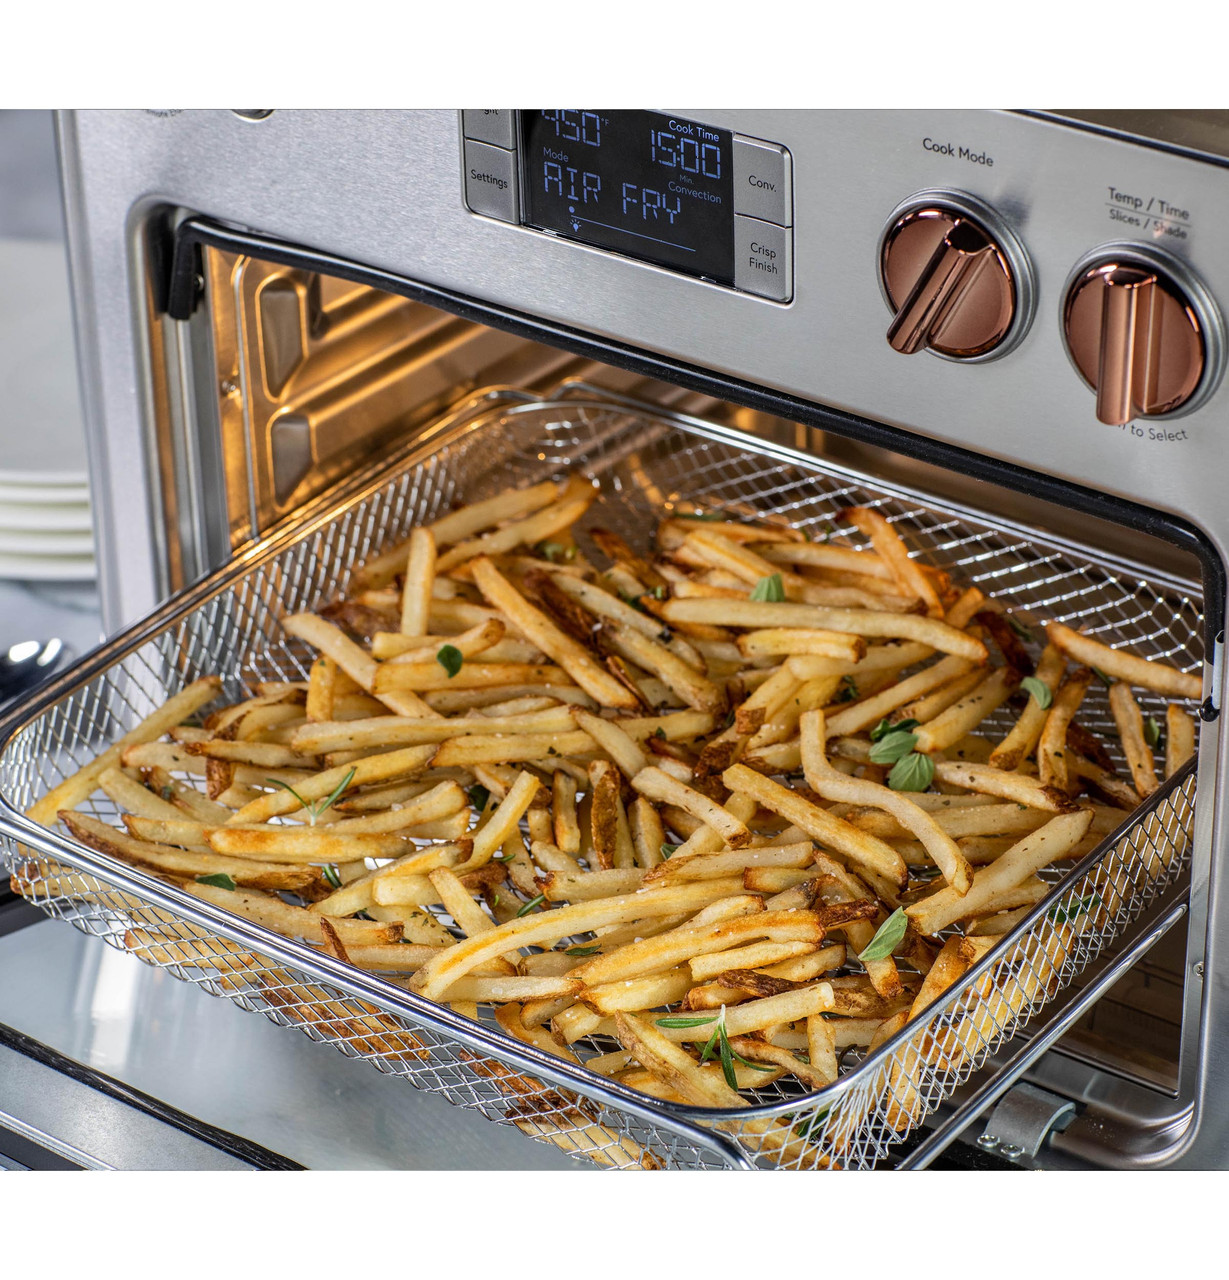 Using your Café Couture Oven with Air Fry 